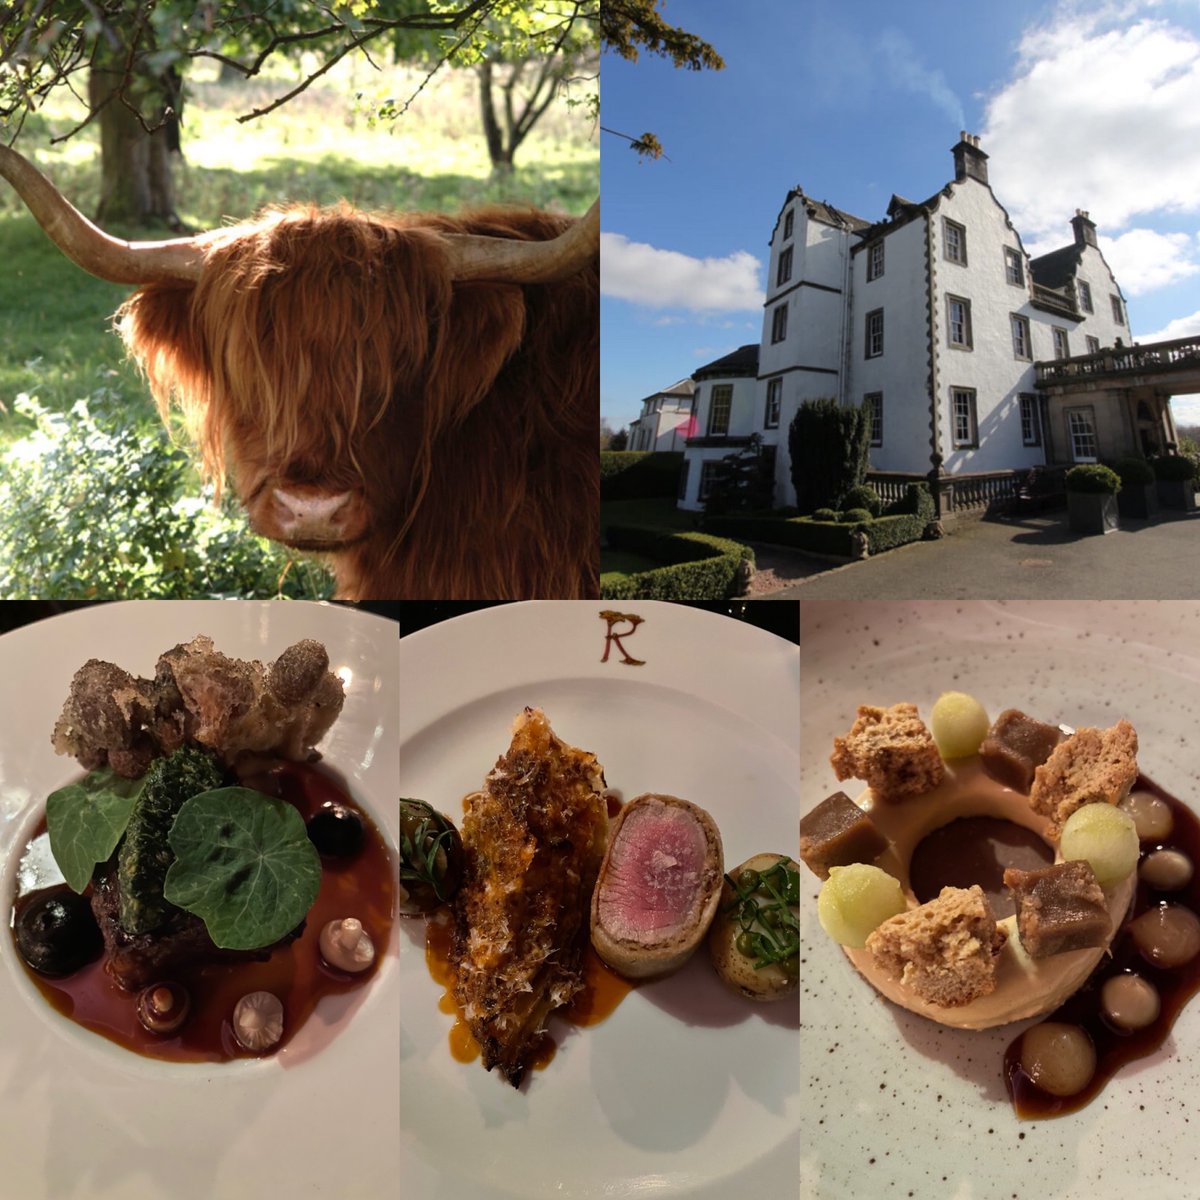 A delight to return to @PrestonfieldHH. Quality Red Star Service & Hospitality from this wonderful oasis so close to Edinburgh city centre. Fantastic 2 #AARosette food in Rhubarb with sumptuous decor & furnishings. ratedtrips.com/establishments… @edinburgh @VisitScotland